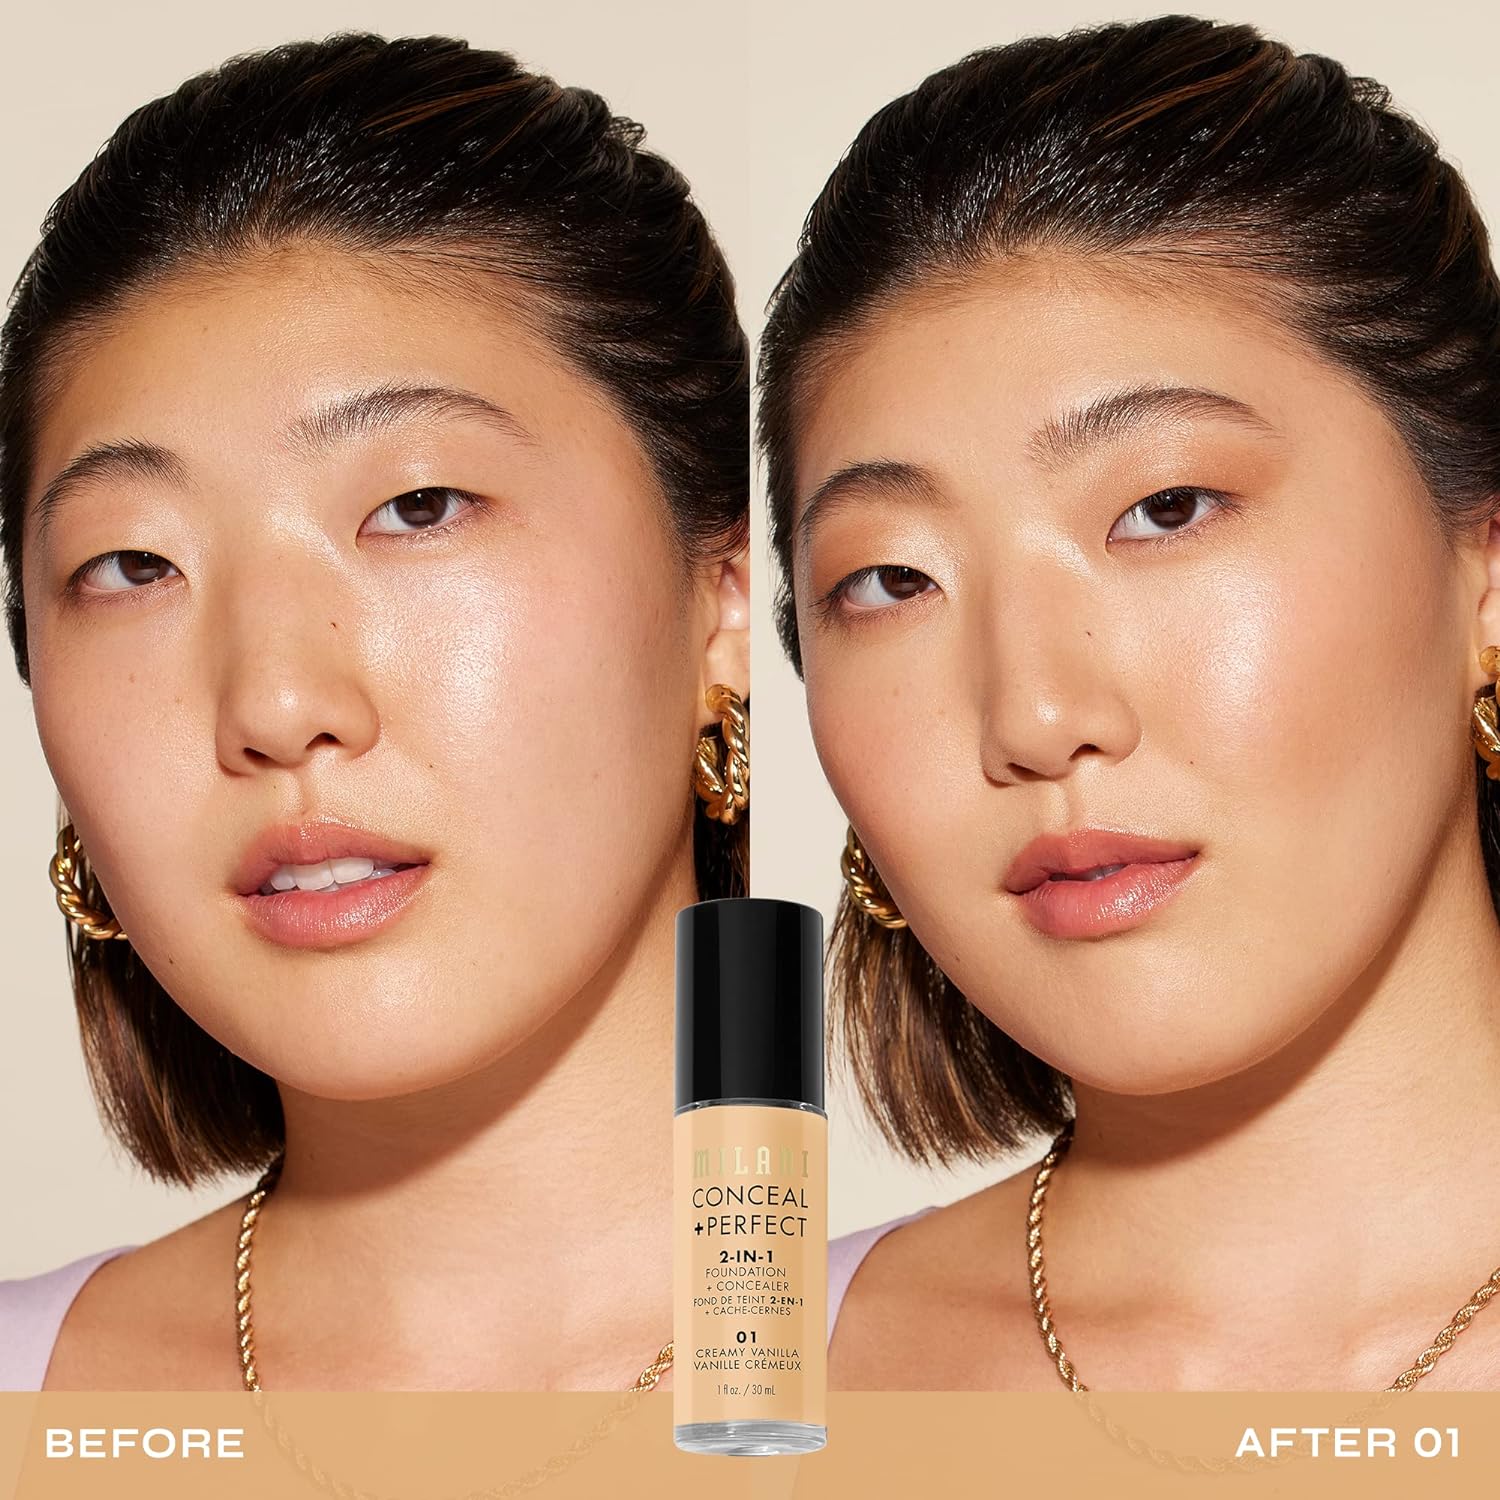 Milani Conceal + Perfect 2-in-1 Foundation + Concealer (1 Fl. Oz.) Cruelty-Free Liquid Foundation - Cover Under-Eye Circles, Blemishes & Skin Discoloration for a Flawless Complexion